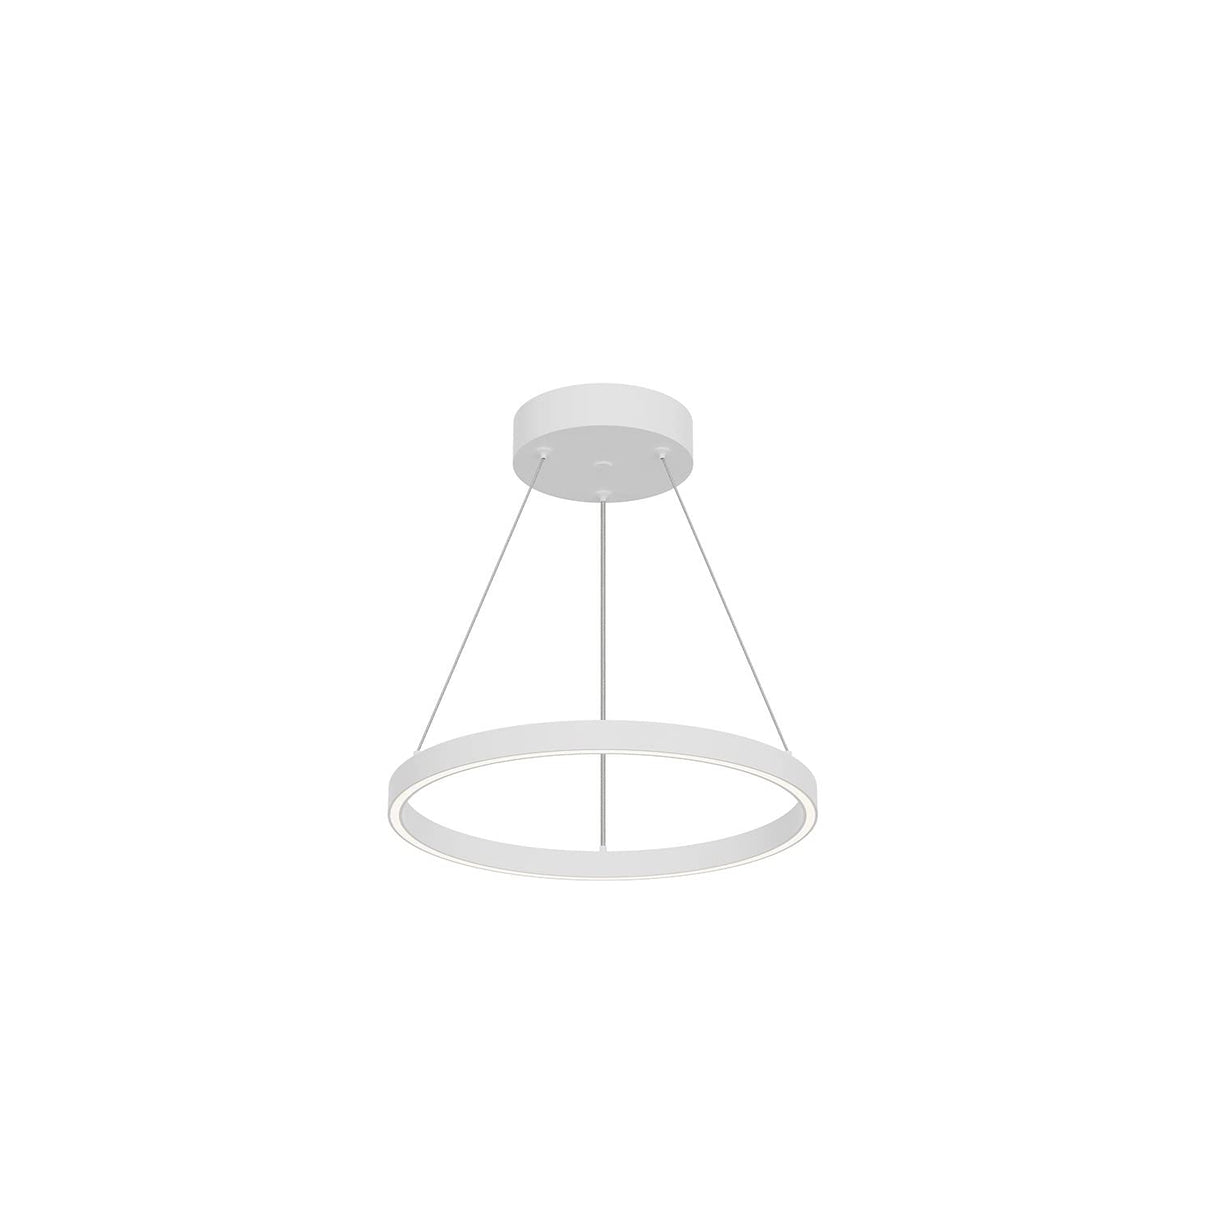 Kuzco PD87118-WH CERCHIO 18" PENDANT WH TEXTURED DOWN ONLY DUO CANOPY 930 TRIAC 120 39W